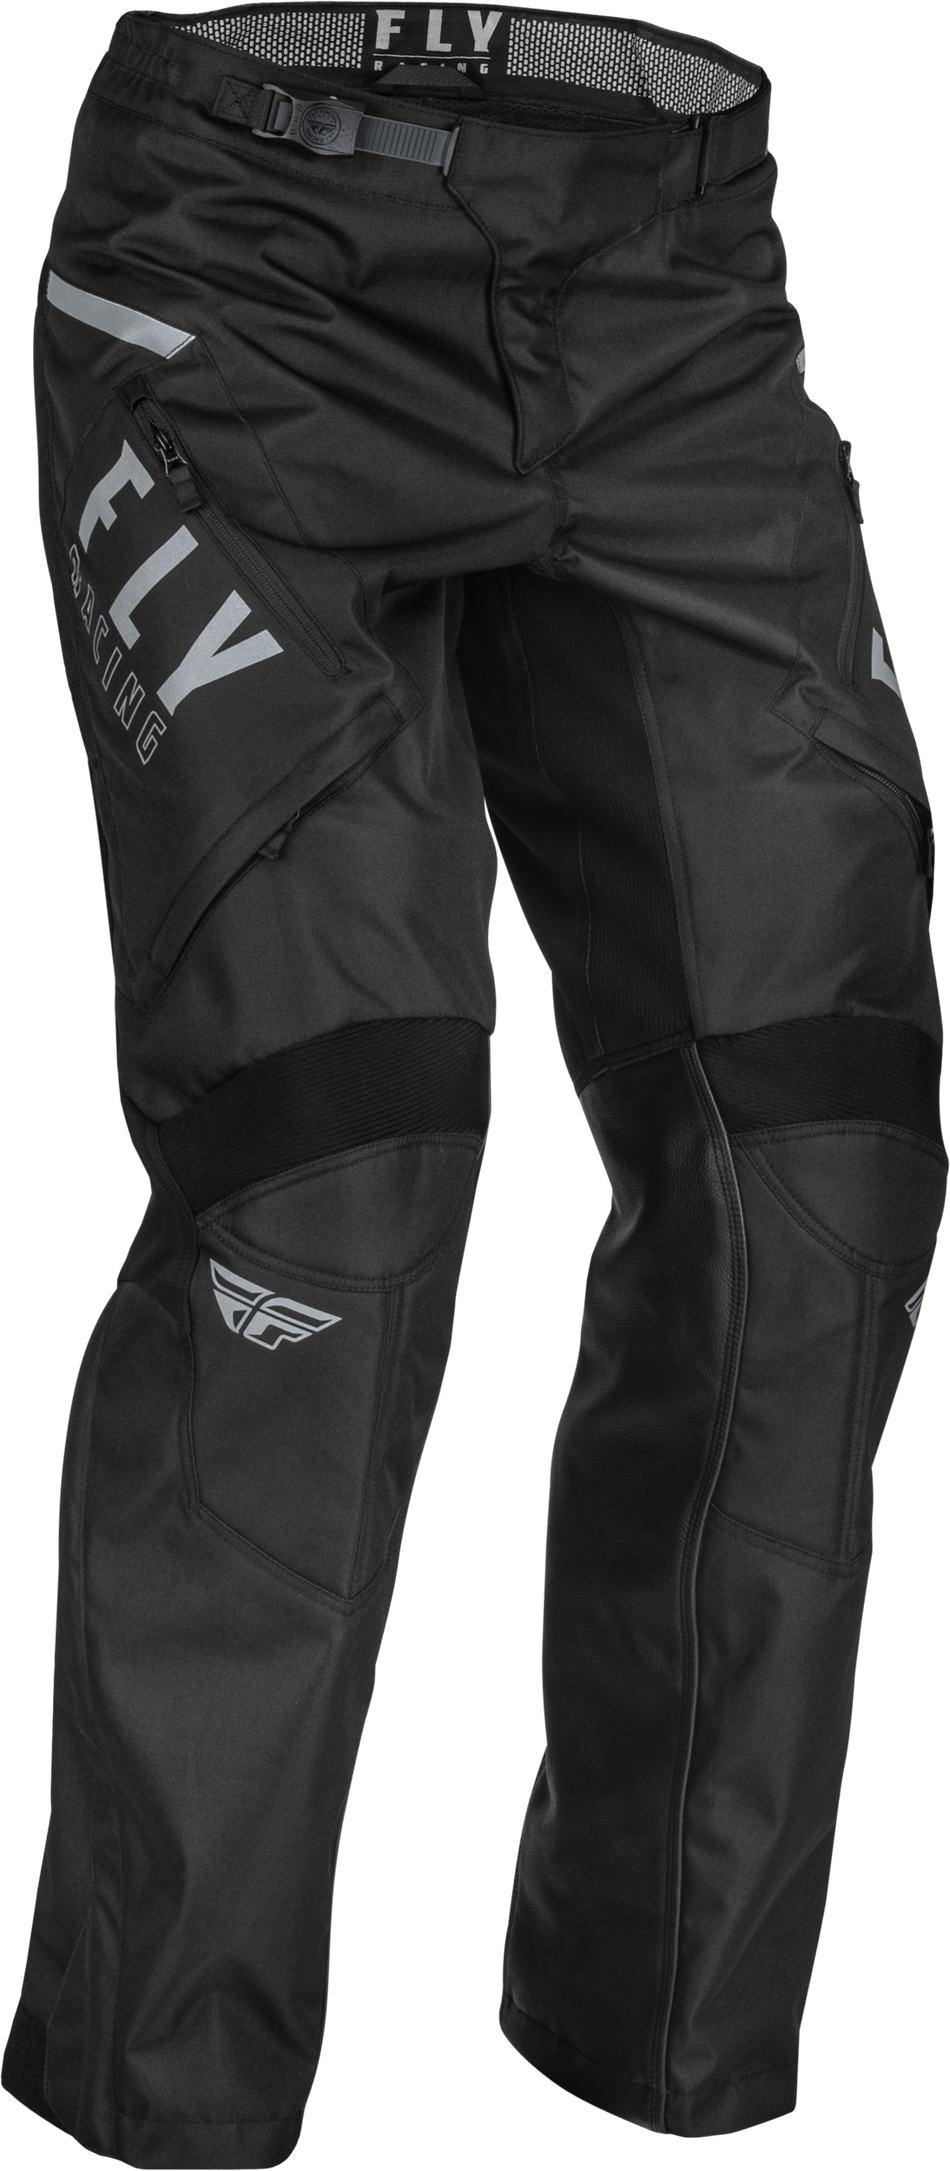 FLY RACING Patrol Over-Boot Pants Black/White Sz 32 376-64032